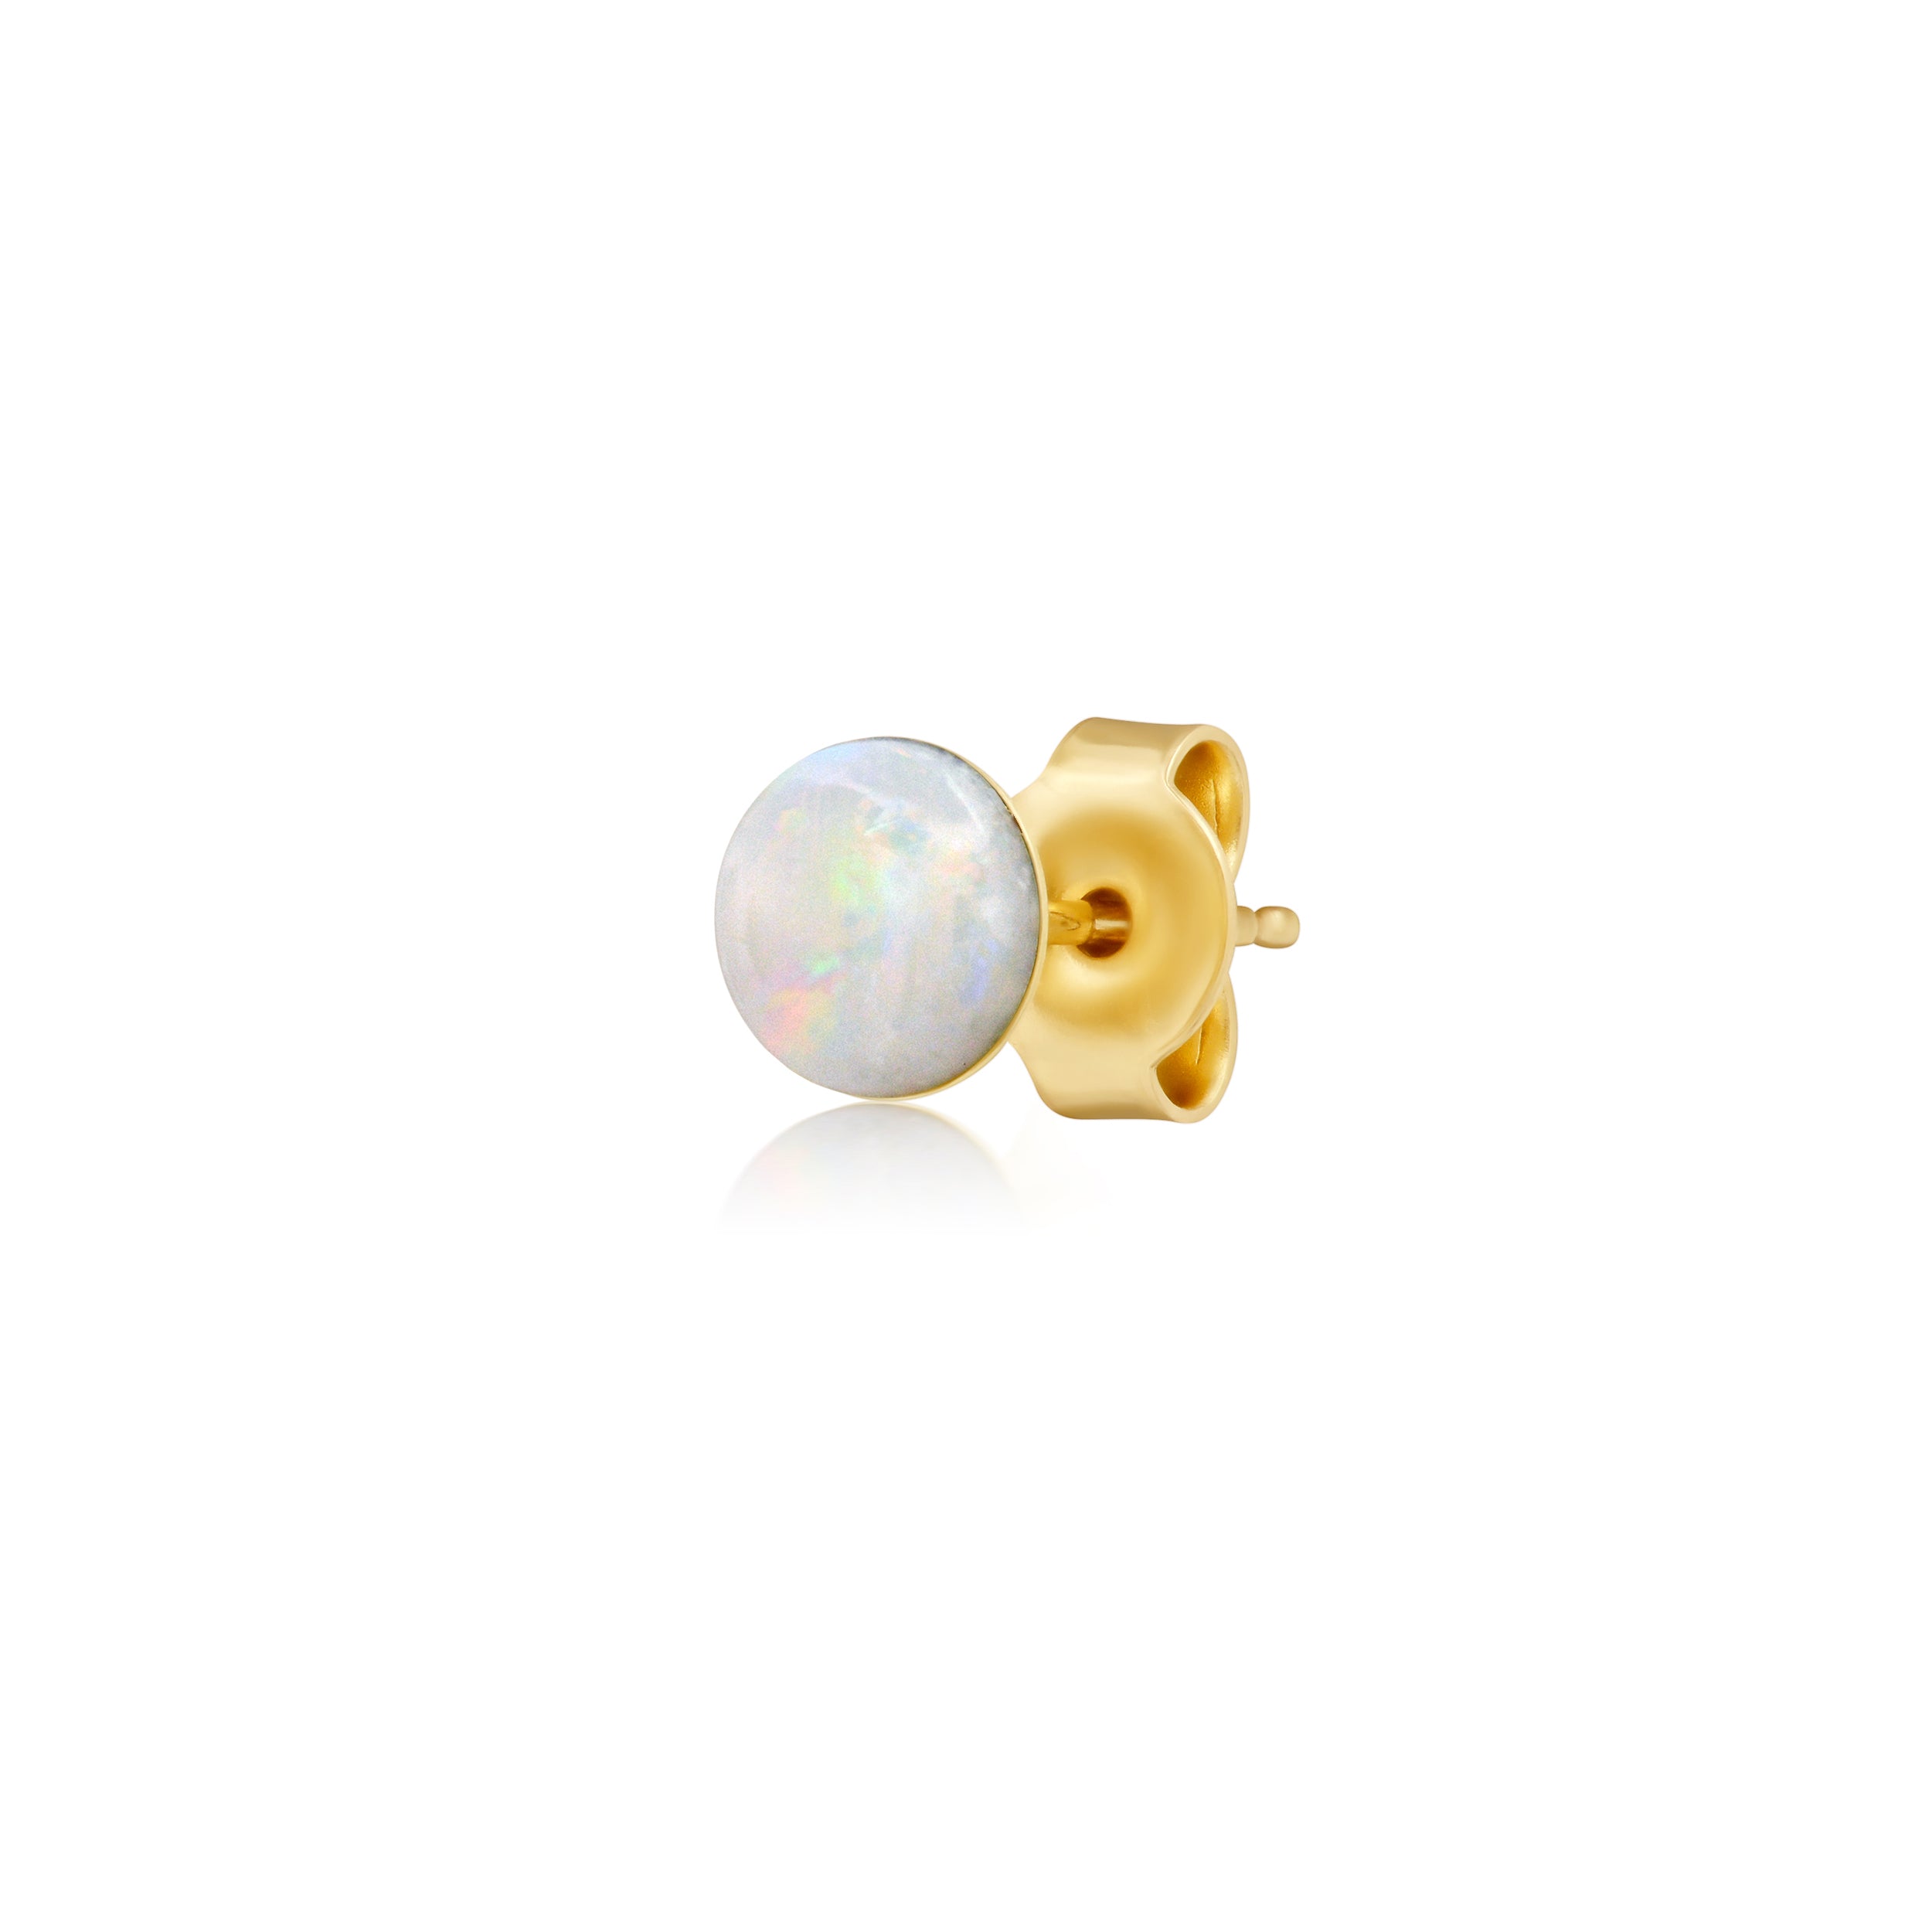 natural round opal set in 14k yellow gold.